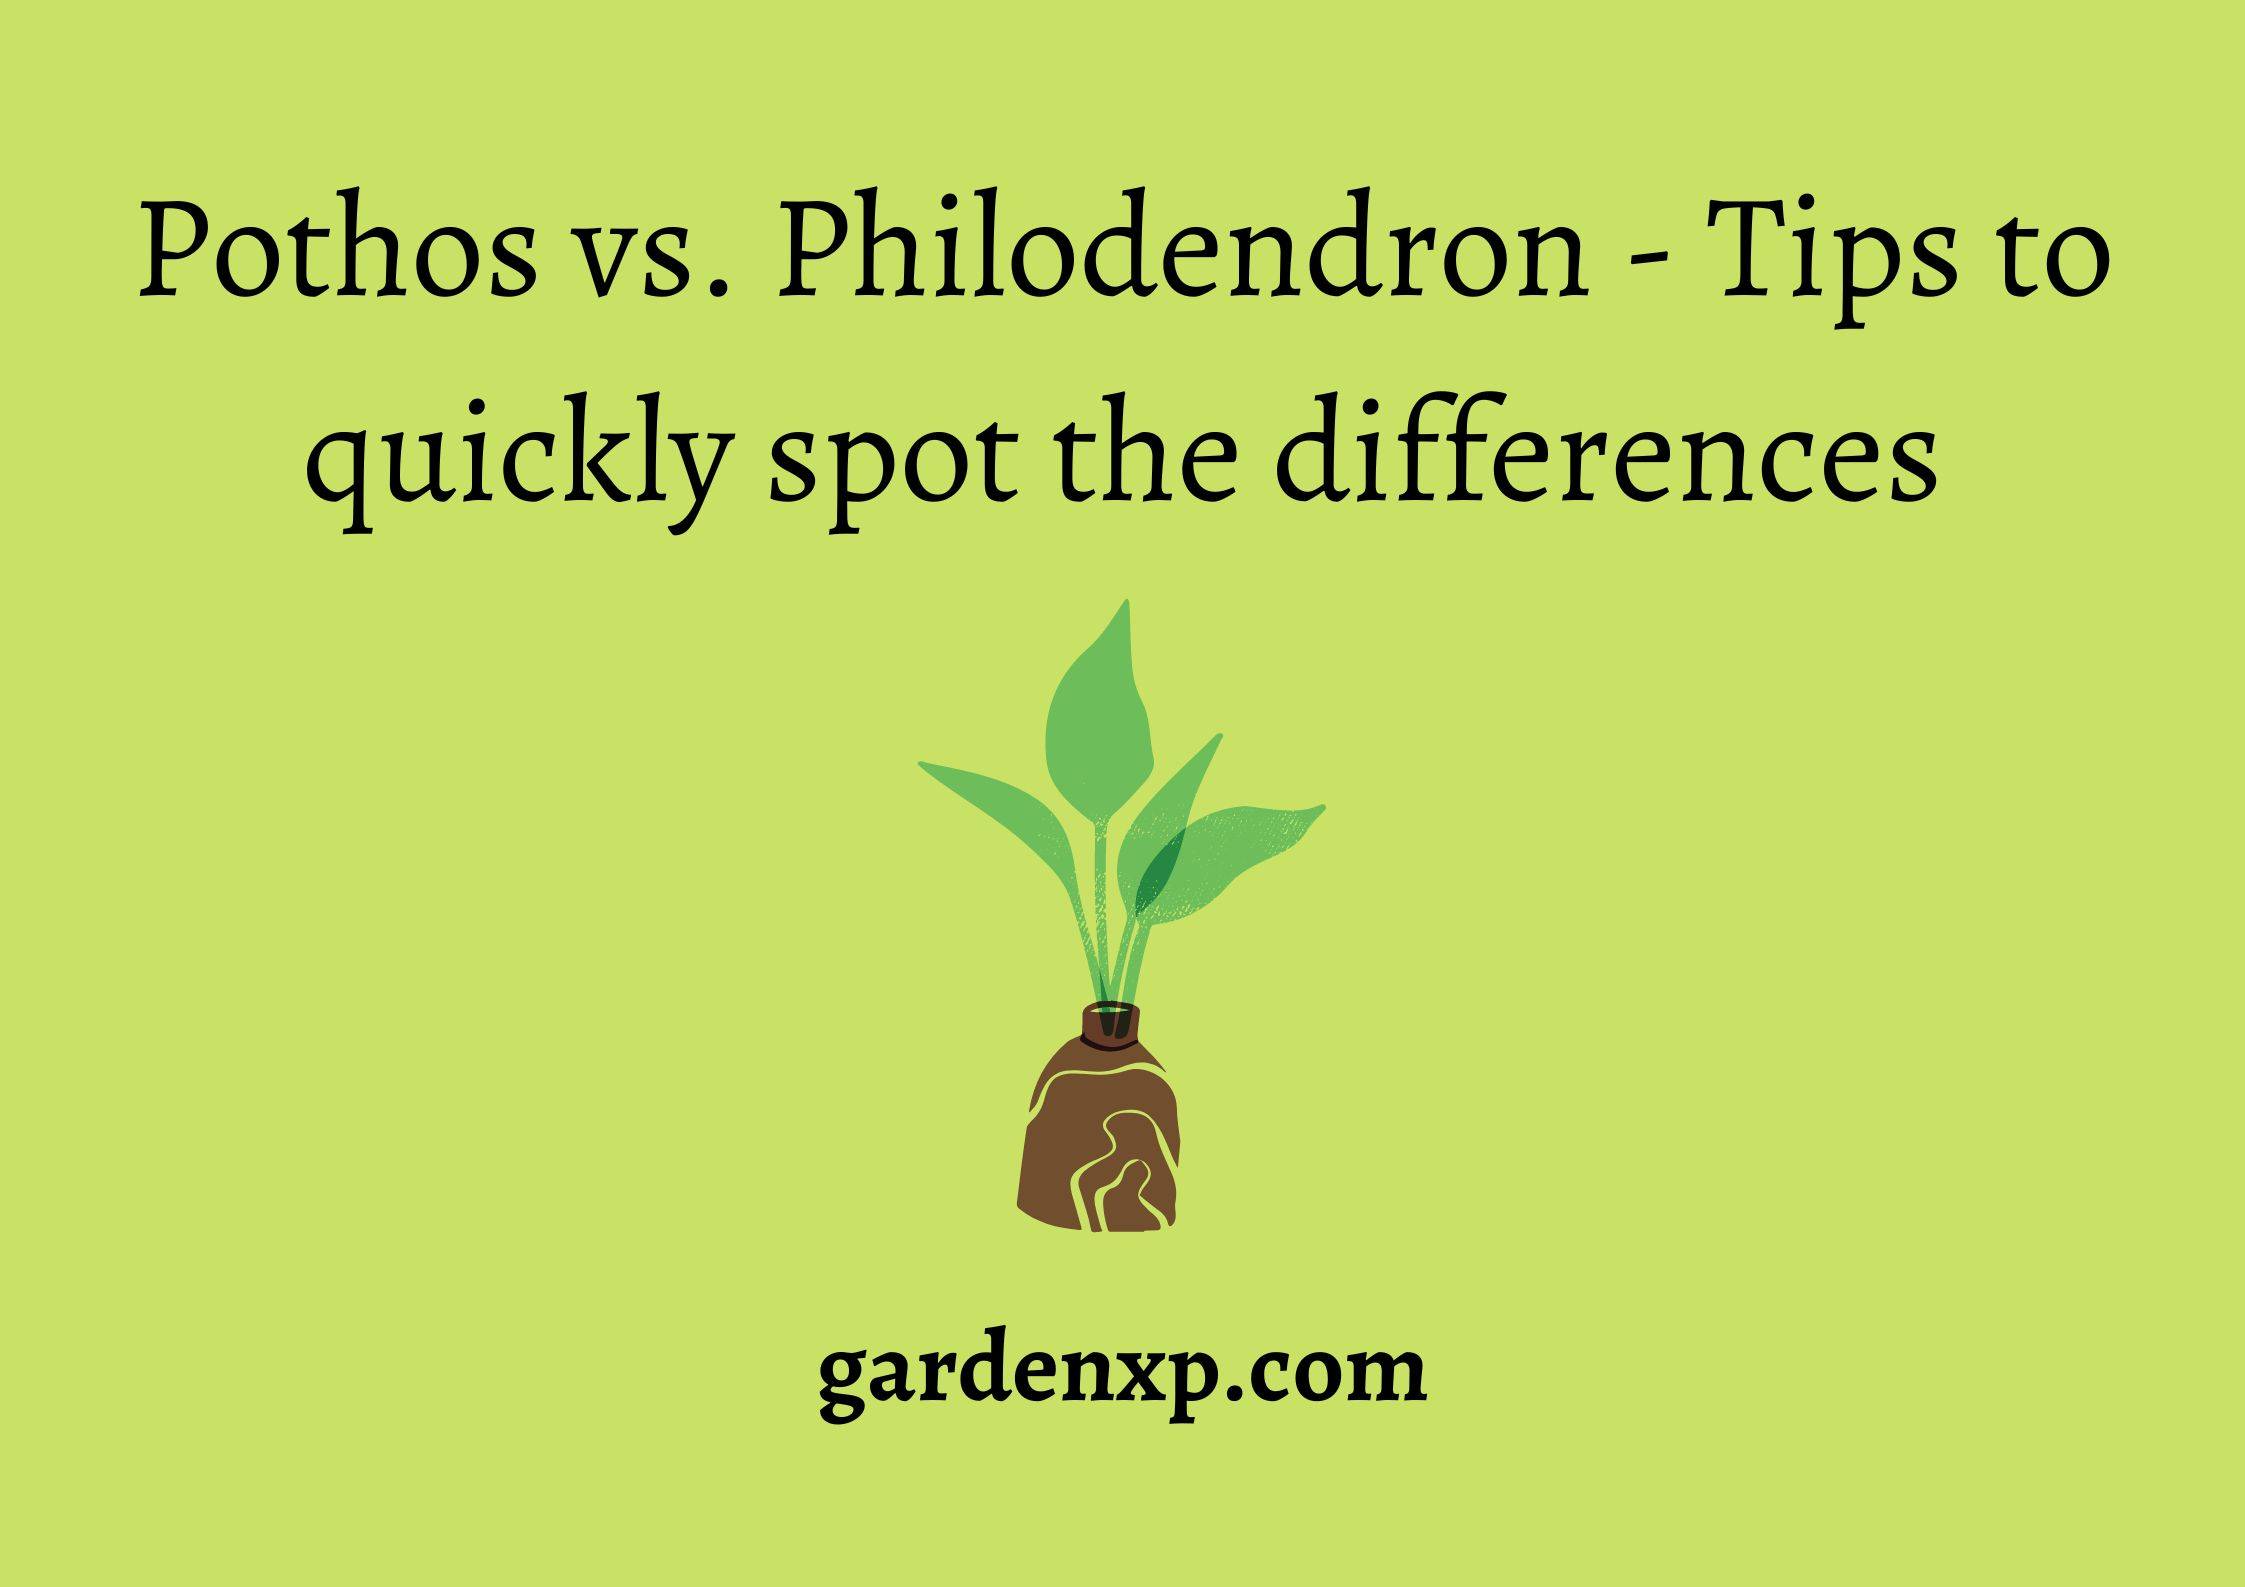 Pothos vs Philodendron - Tips to quickly spot the differences